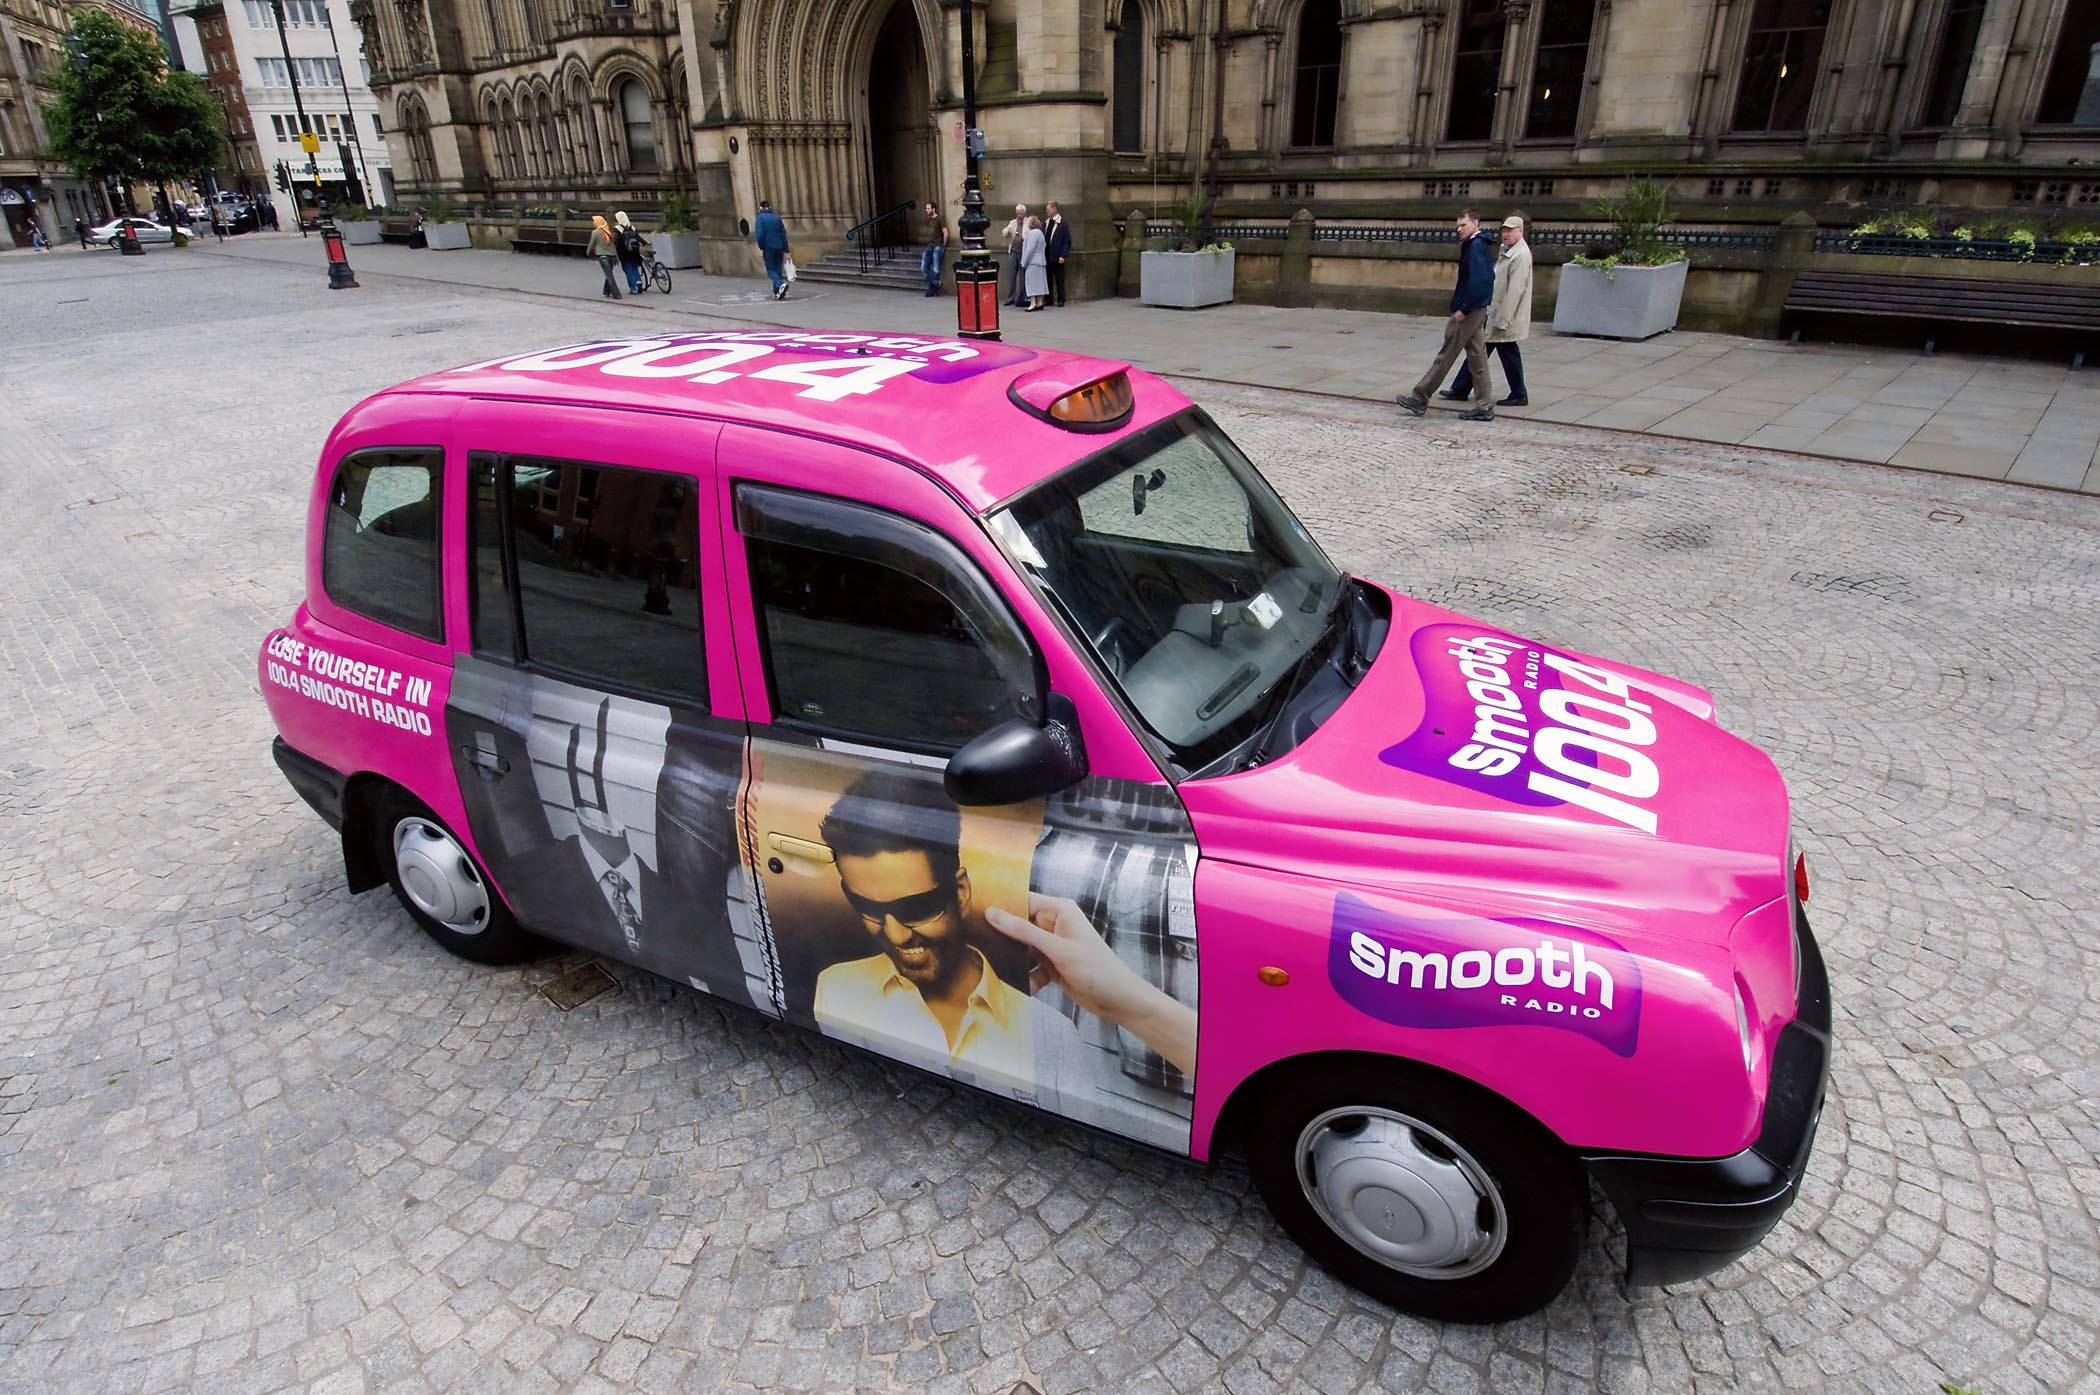 2007 Ubiquitous taxi advertising campaign for Smooth Radio - Smooth Ride